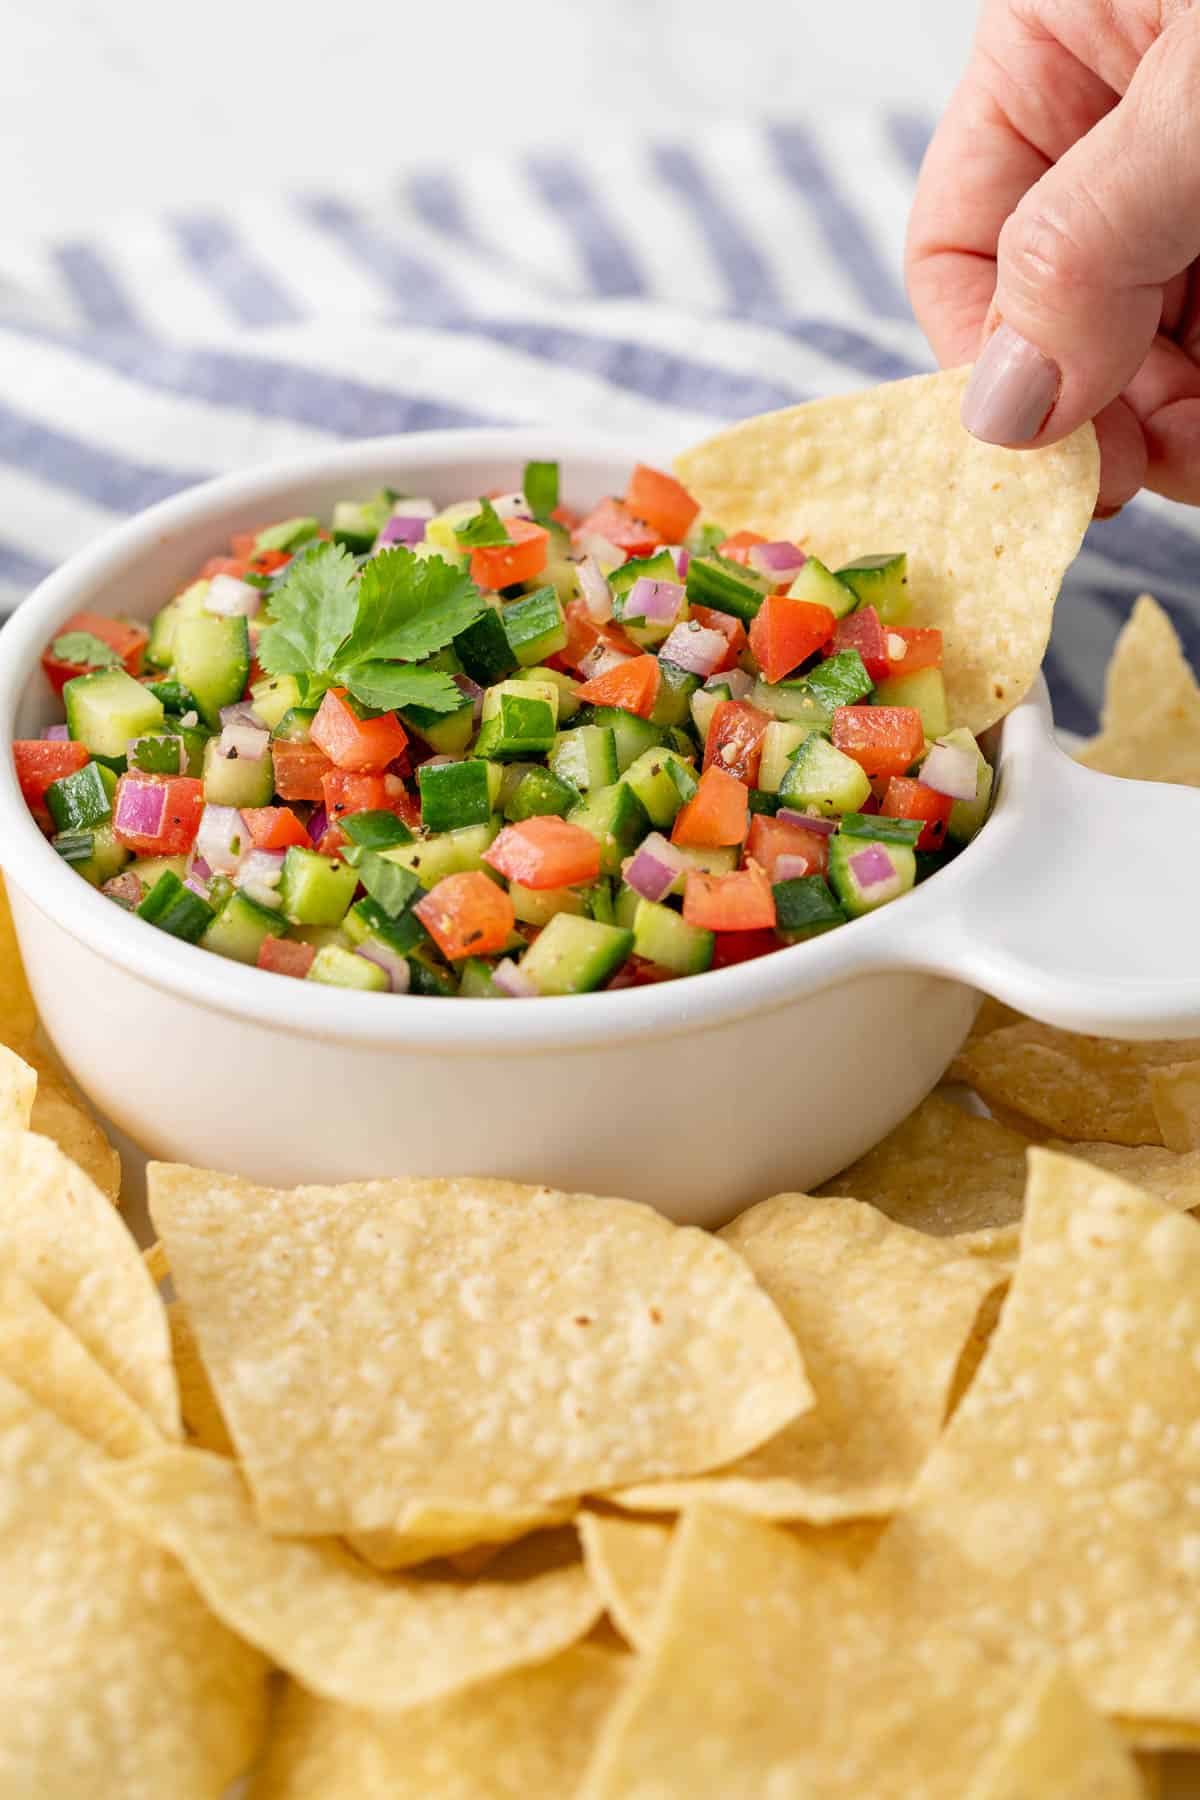 A tortilla chip is being dipped into a bowl of cucumber salsa.